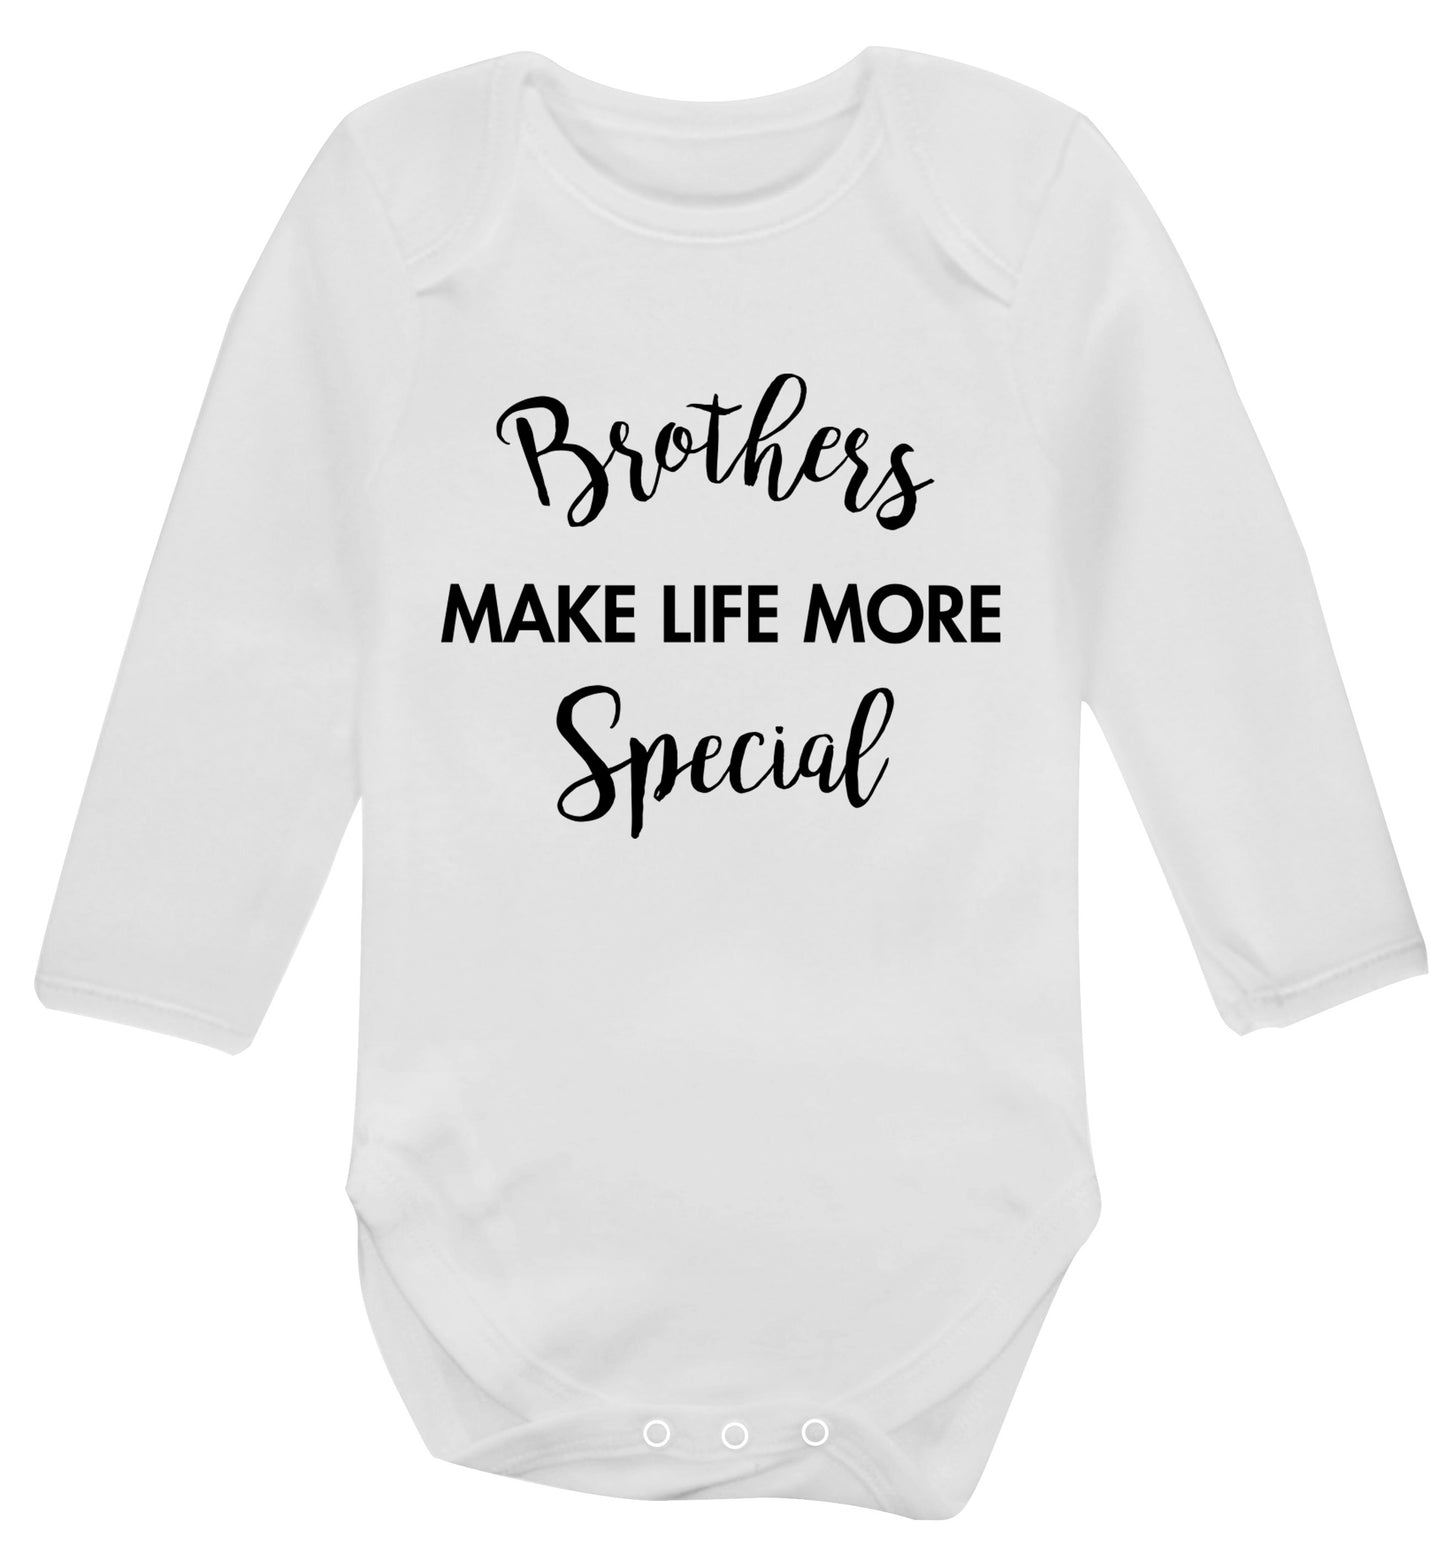 Brothers make life more special Baby Vest long sleeved white 6-12 months